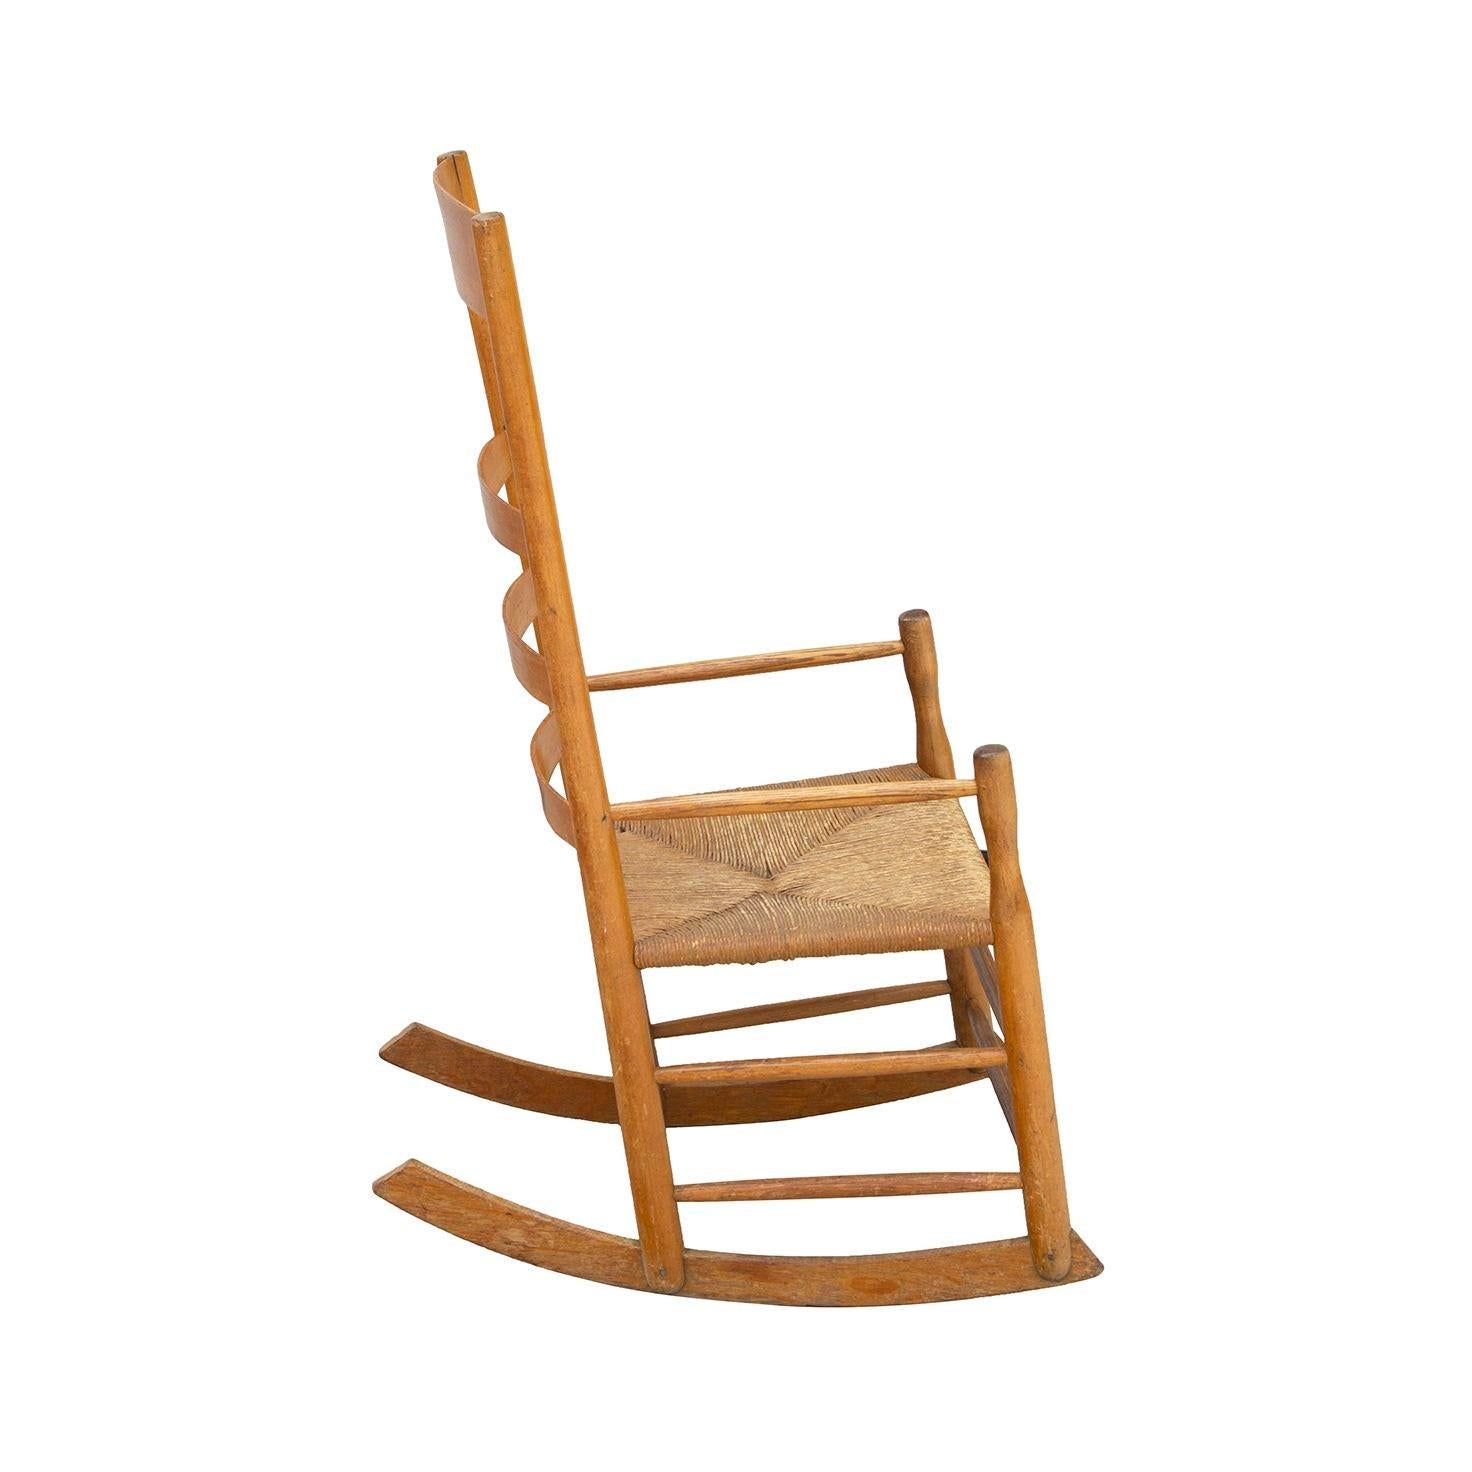 Mid-20th Century Handmade Birch Rocker with Woven Rush Seat For Sale